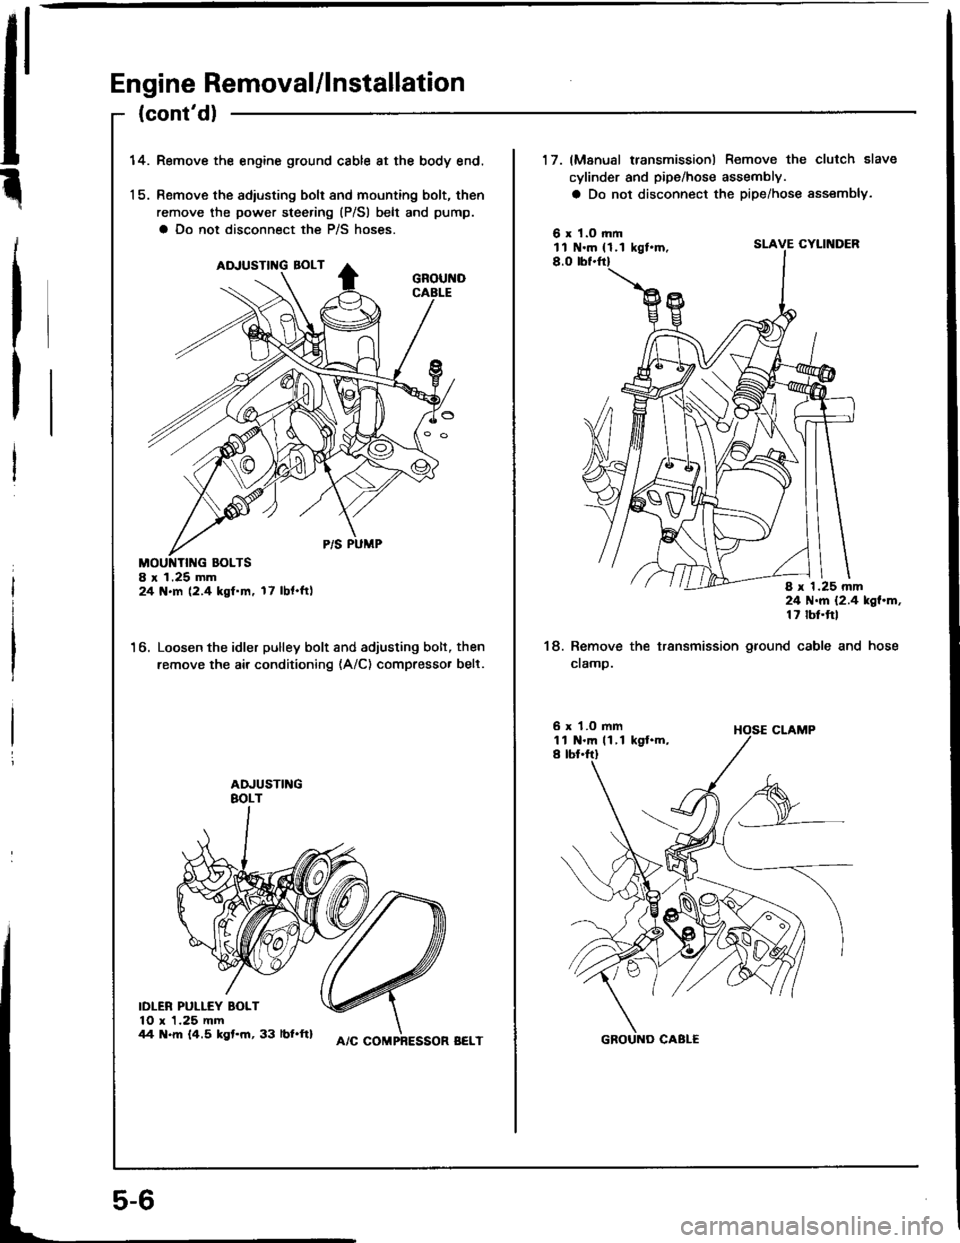 HONDA INTEGRA 1994 4.G Workshop Manual Engine Removal/lnstallation
(contd)
14.Remove the engine ground cable at the body end.
Remove the adiusting bolt and mounting bolt, then
remove the power steering (P/Sl belt and pump.
a Do not discon